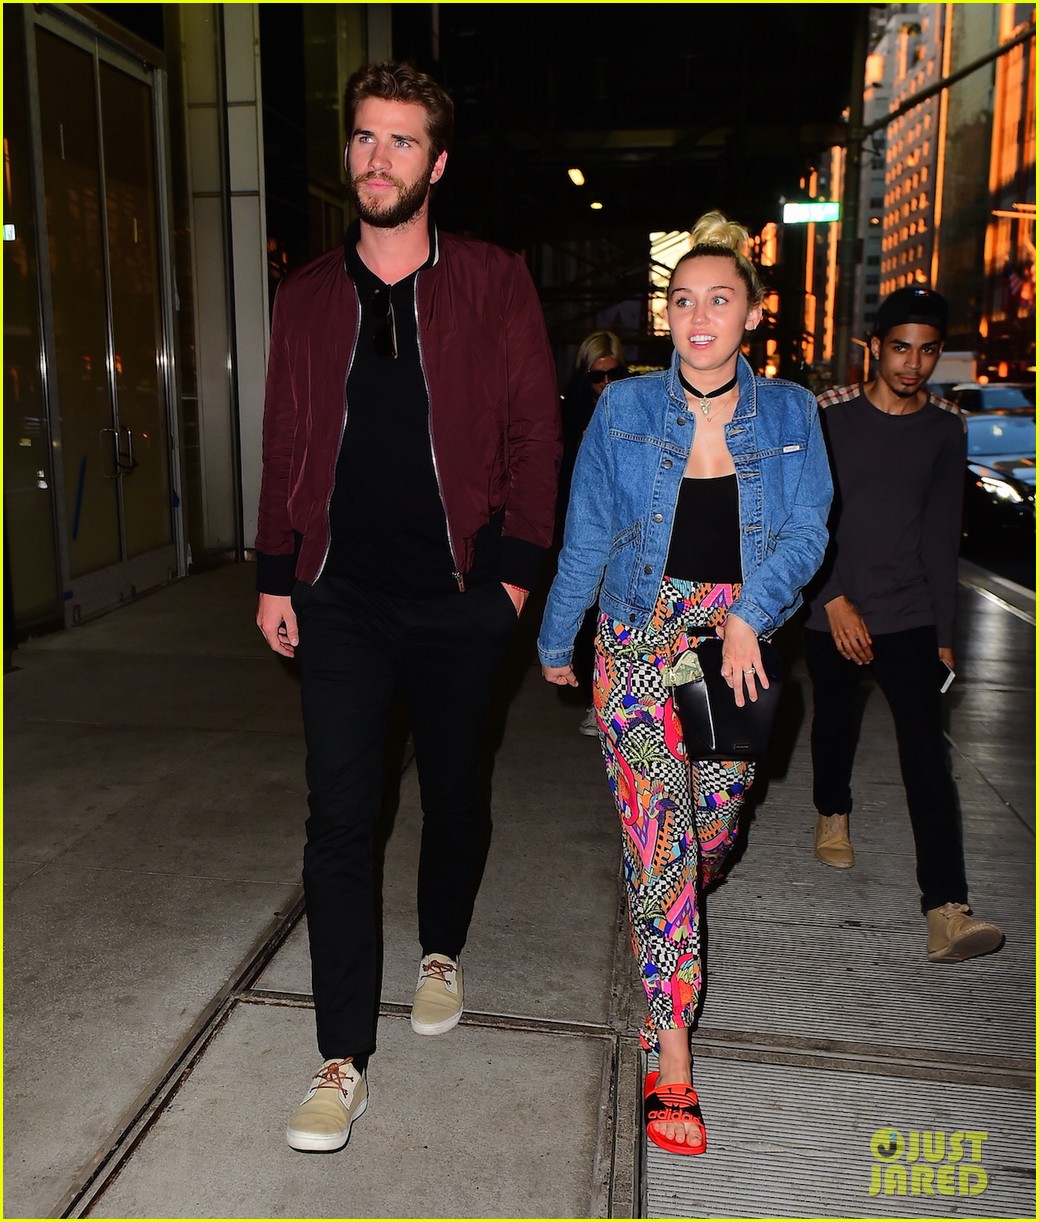 Miley Cyrus Holds Hands With Liam Hemsworth on Date Night | Photo ...